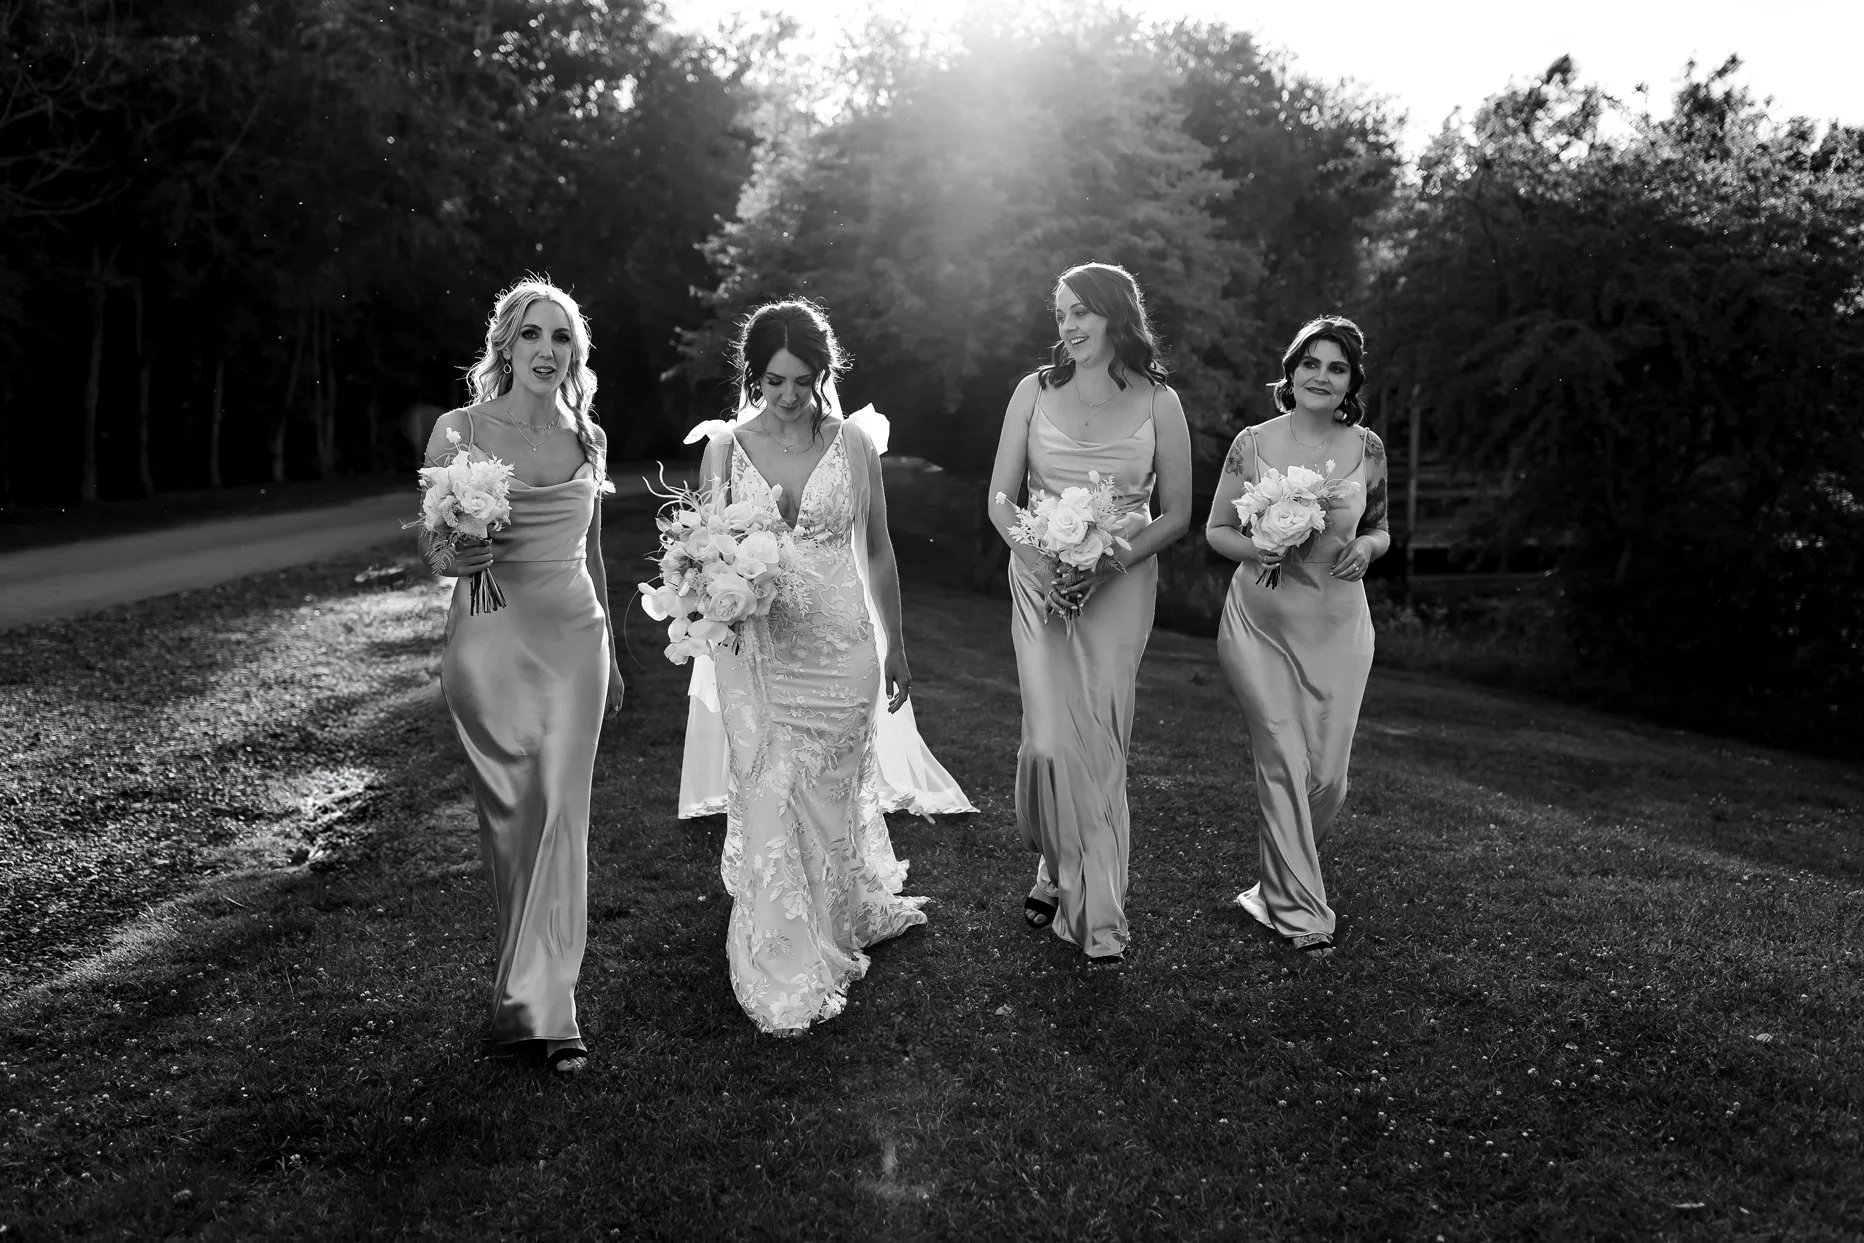 Bride walking with 3 bridesmaids all holding bouquet's. The sun is shining behind them.